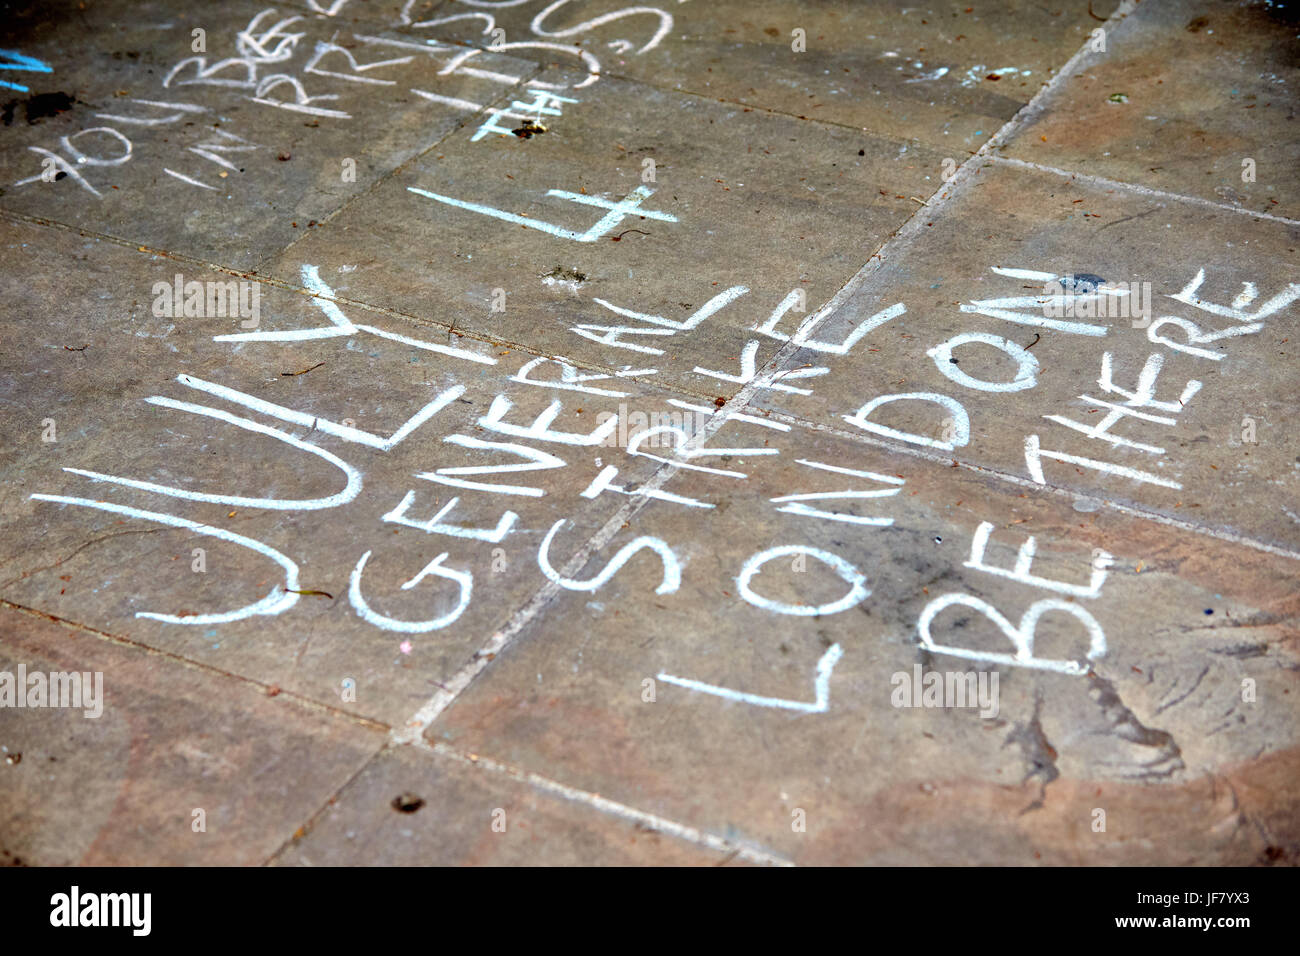 A chalk message on paving stones about a general strike on 4th July Stock Photo